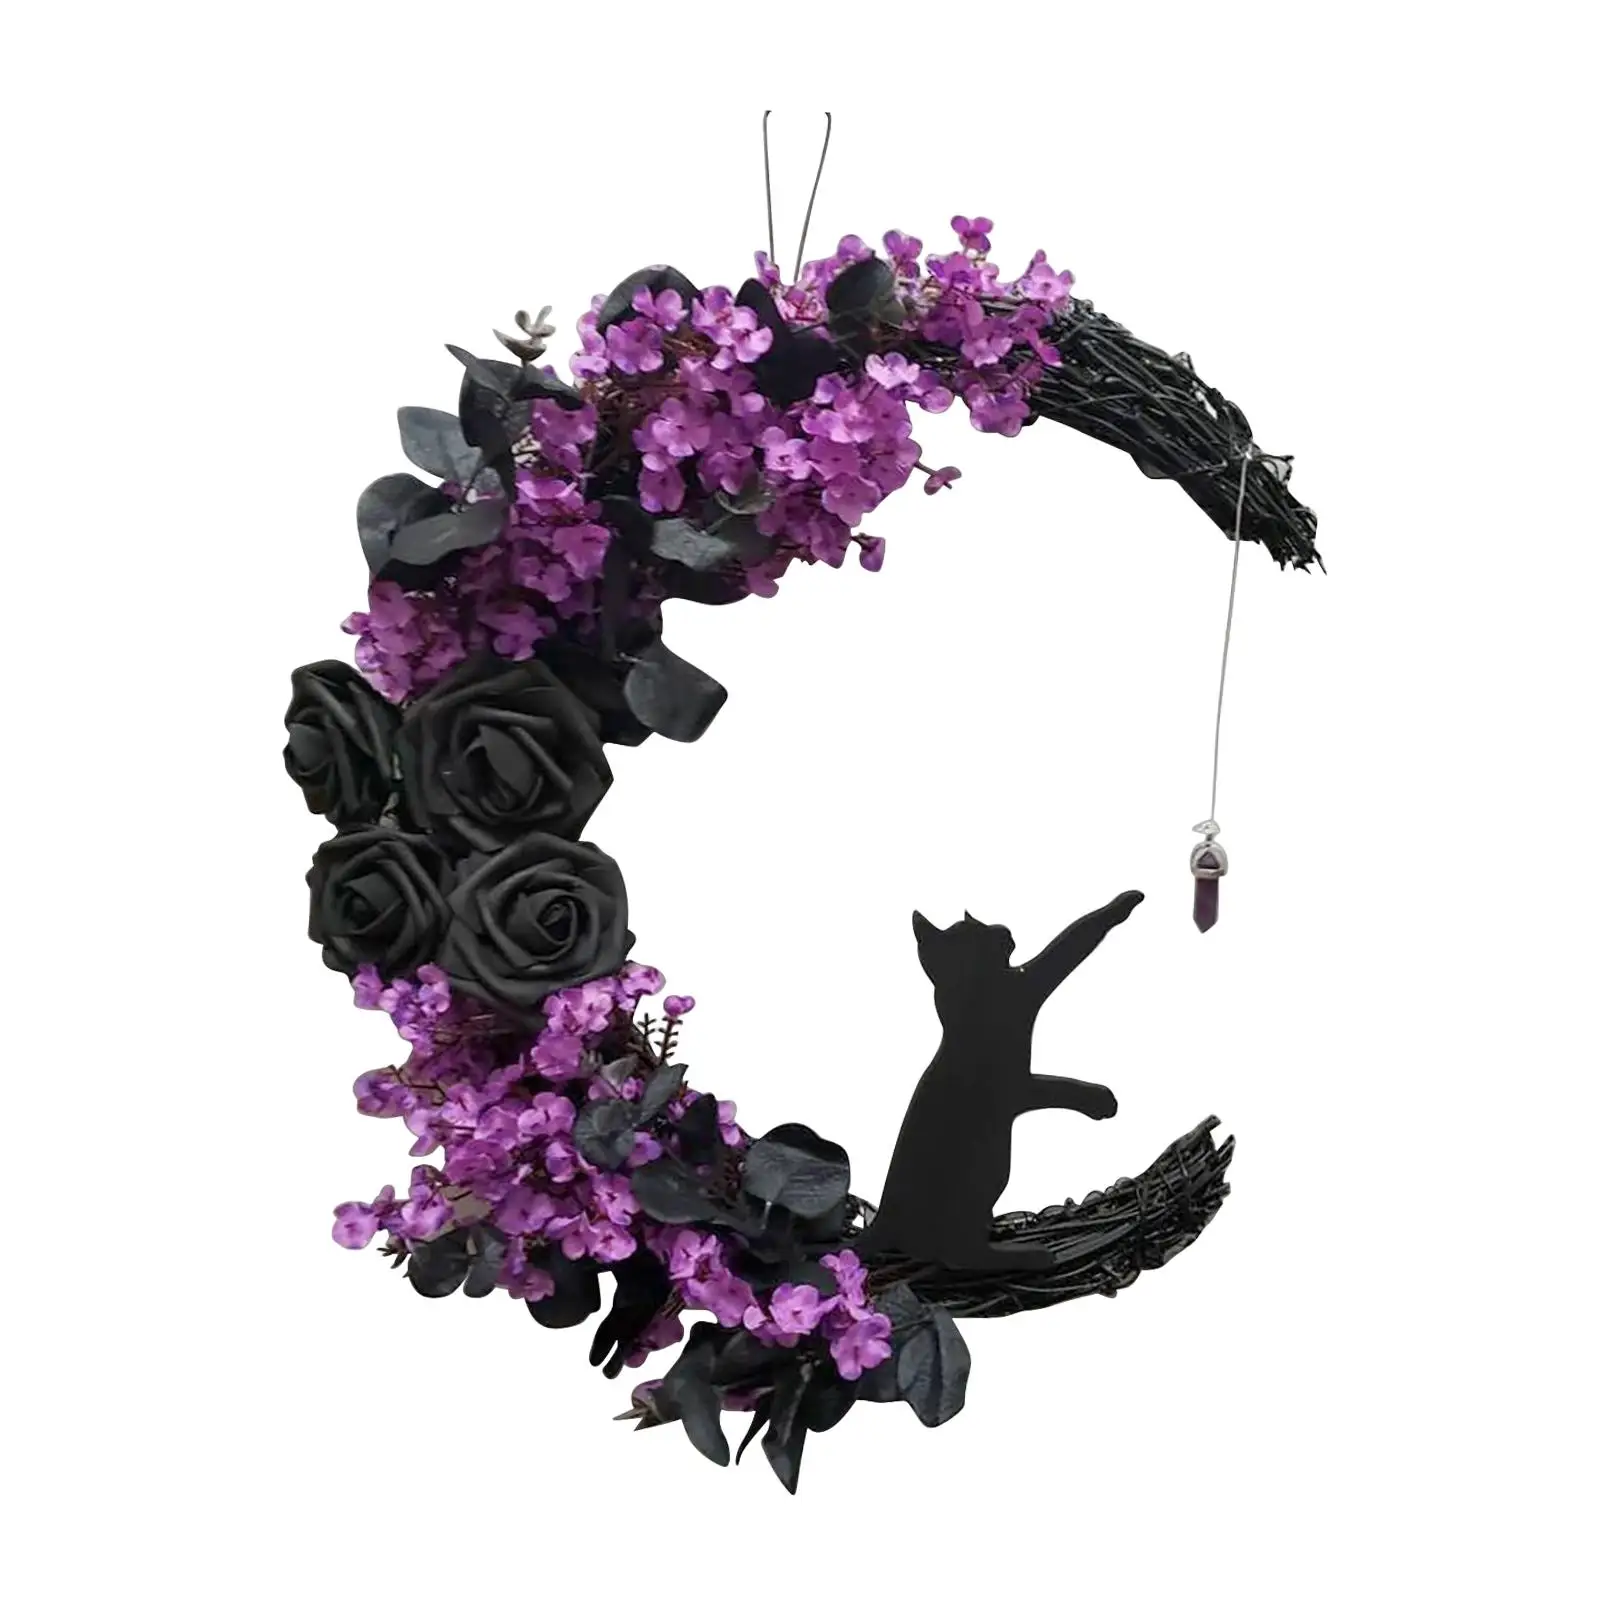 Artificial Halloween Wreath Spooky Party Photo Props 35cm Hanging Garland for Decoration Halloween Outdoor Holiday Festival